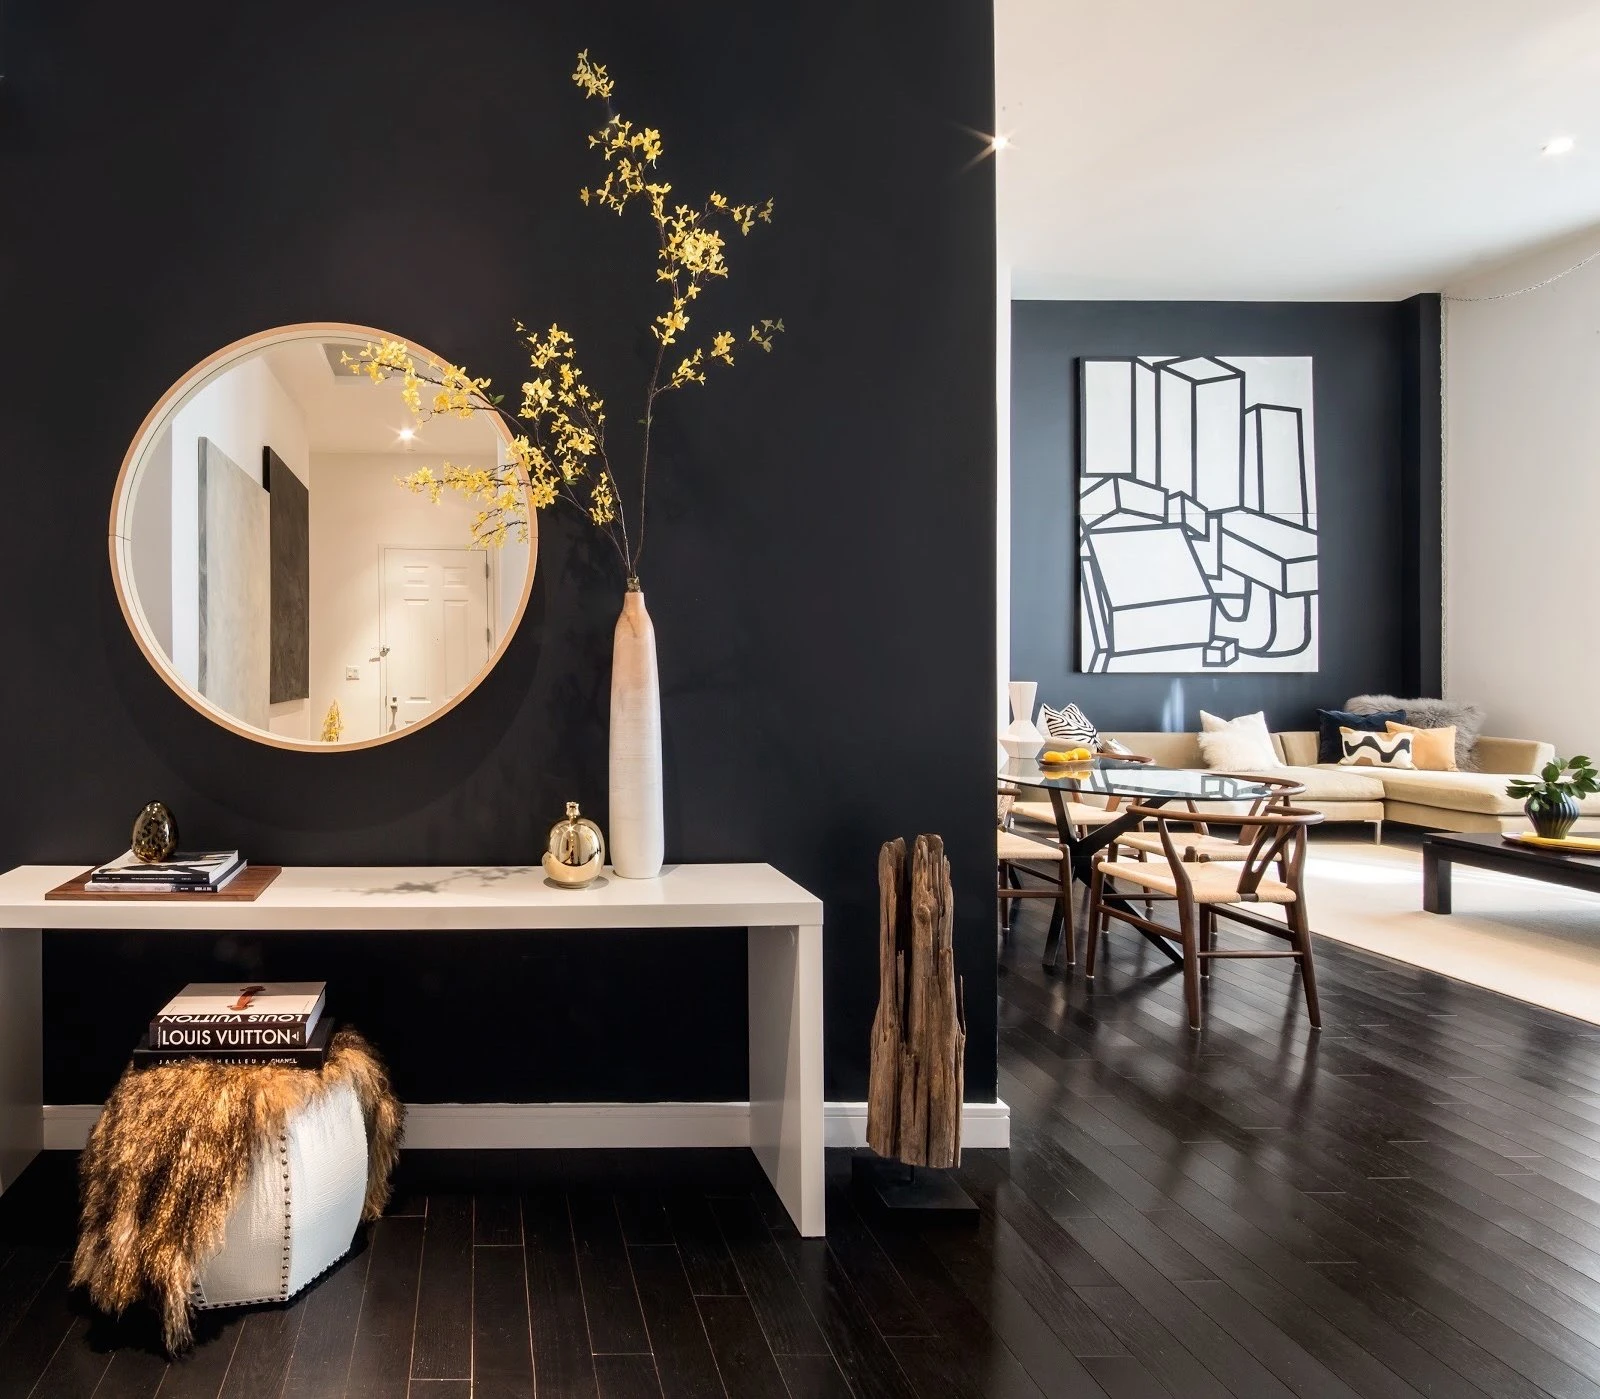 Plagued With Dated Mirrored Walls? 5 Design Ideas to Make Them Work